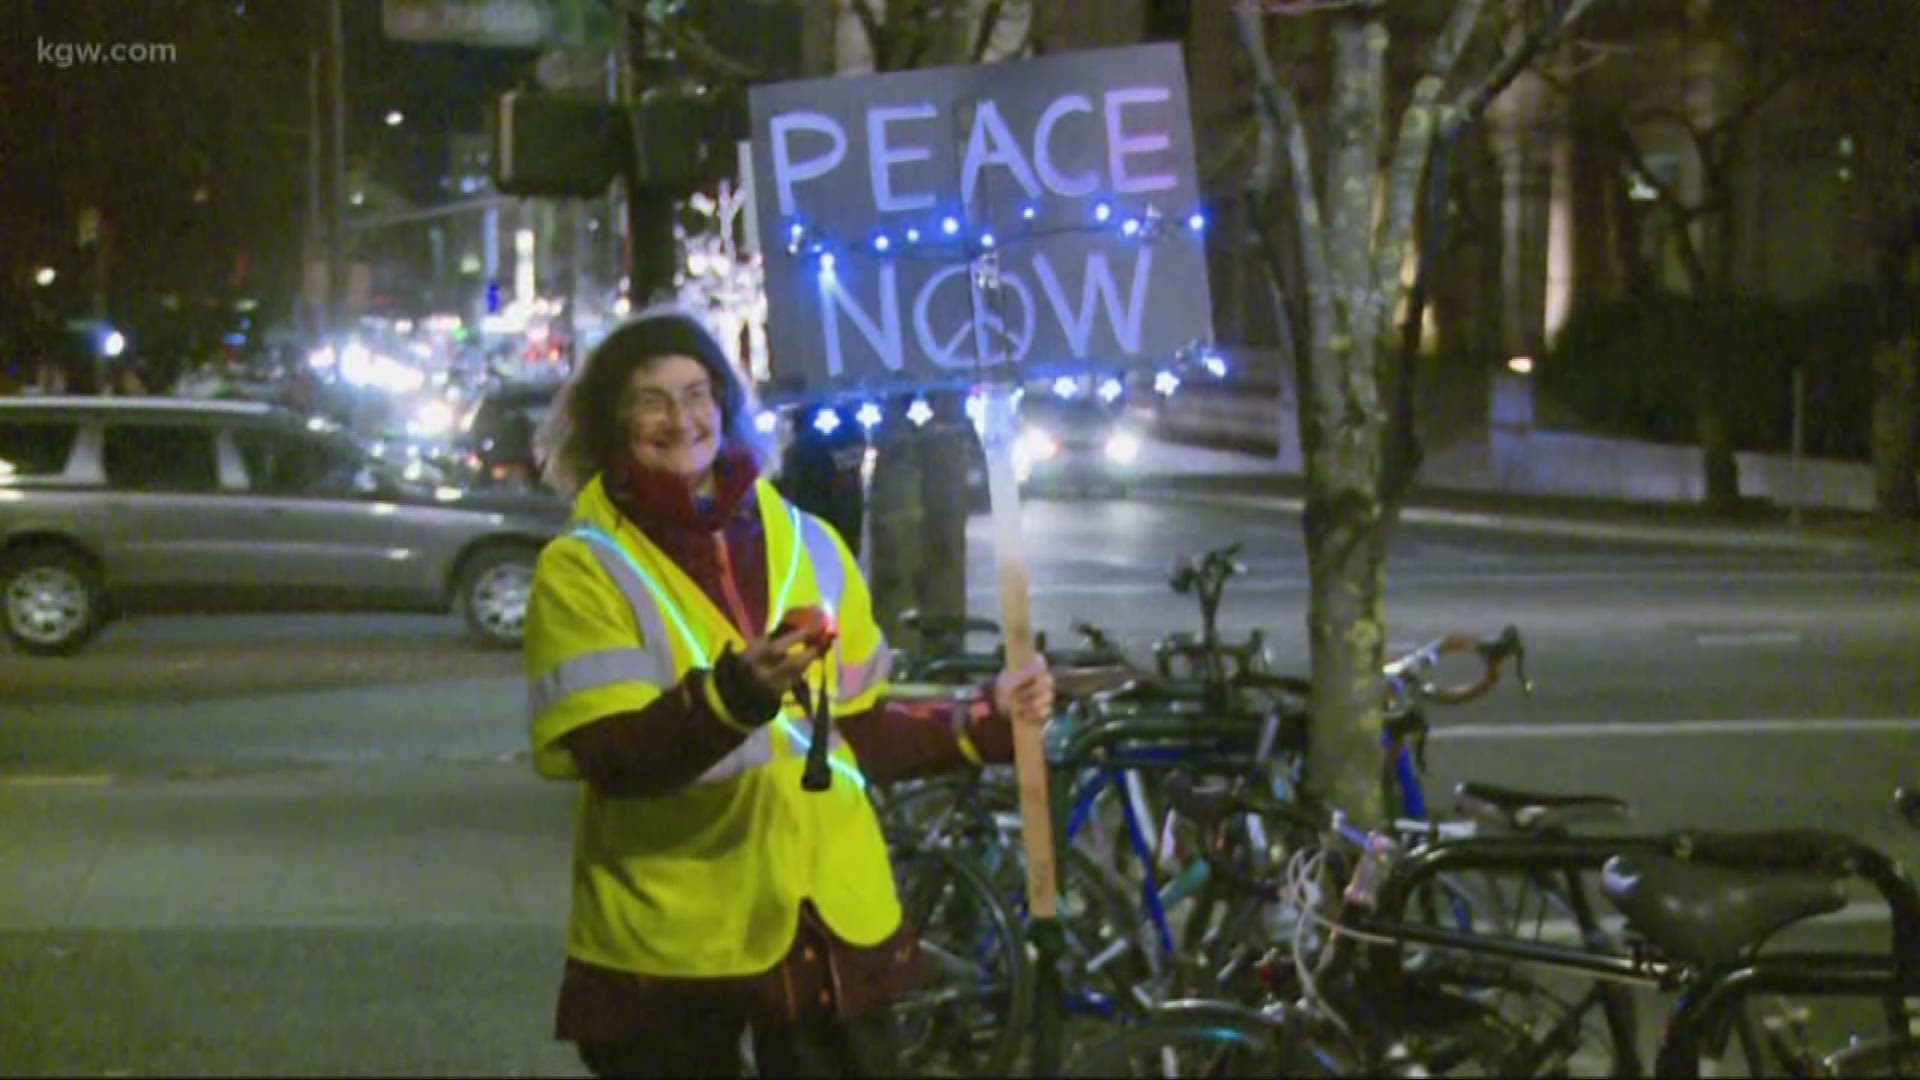 Dozens of people gathered in downtown Portland on Friday evening to protest this week’s US drone strike which killed one of Iran’s top military leaders.